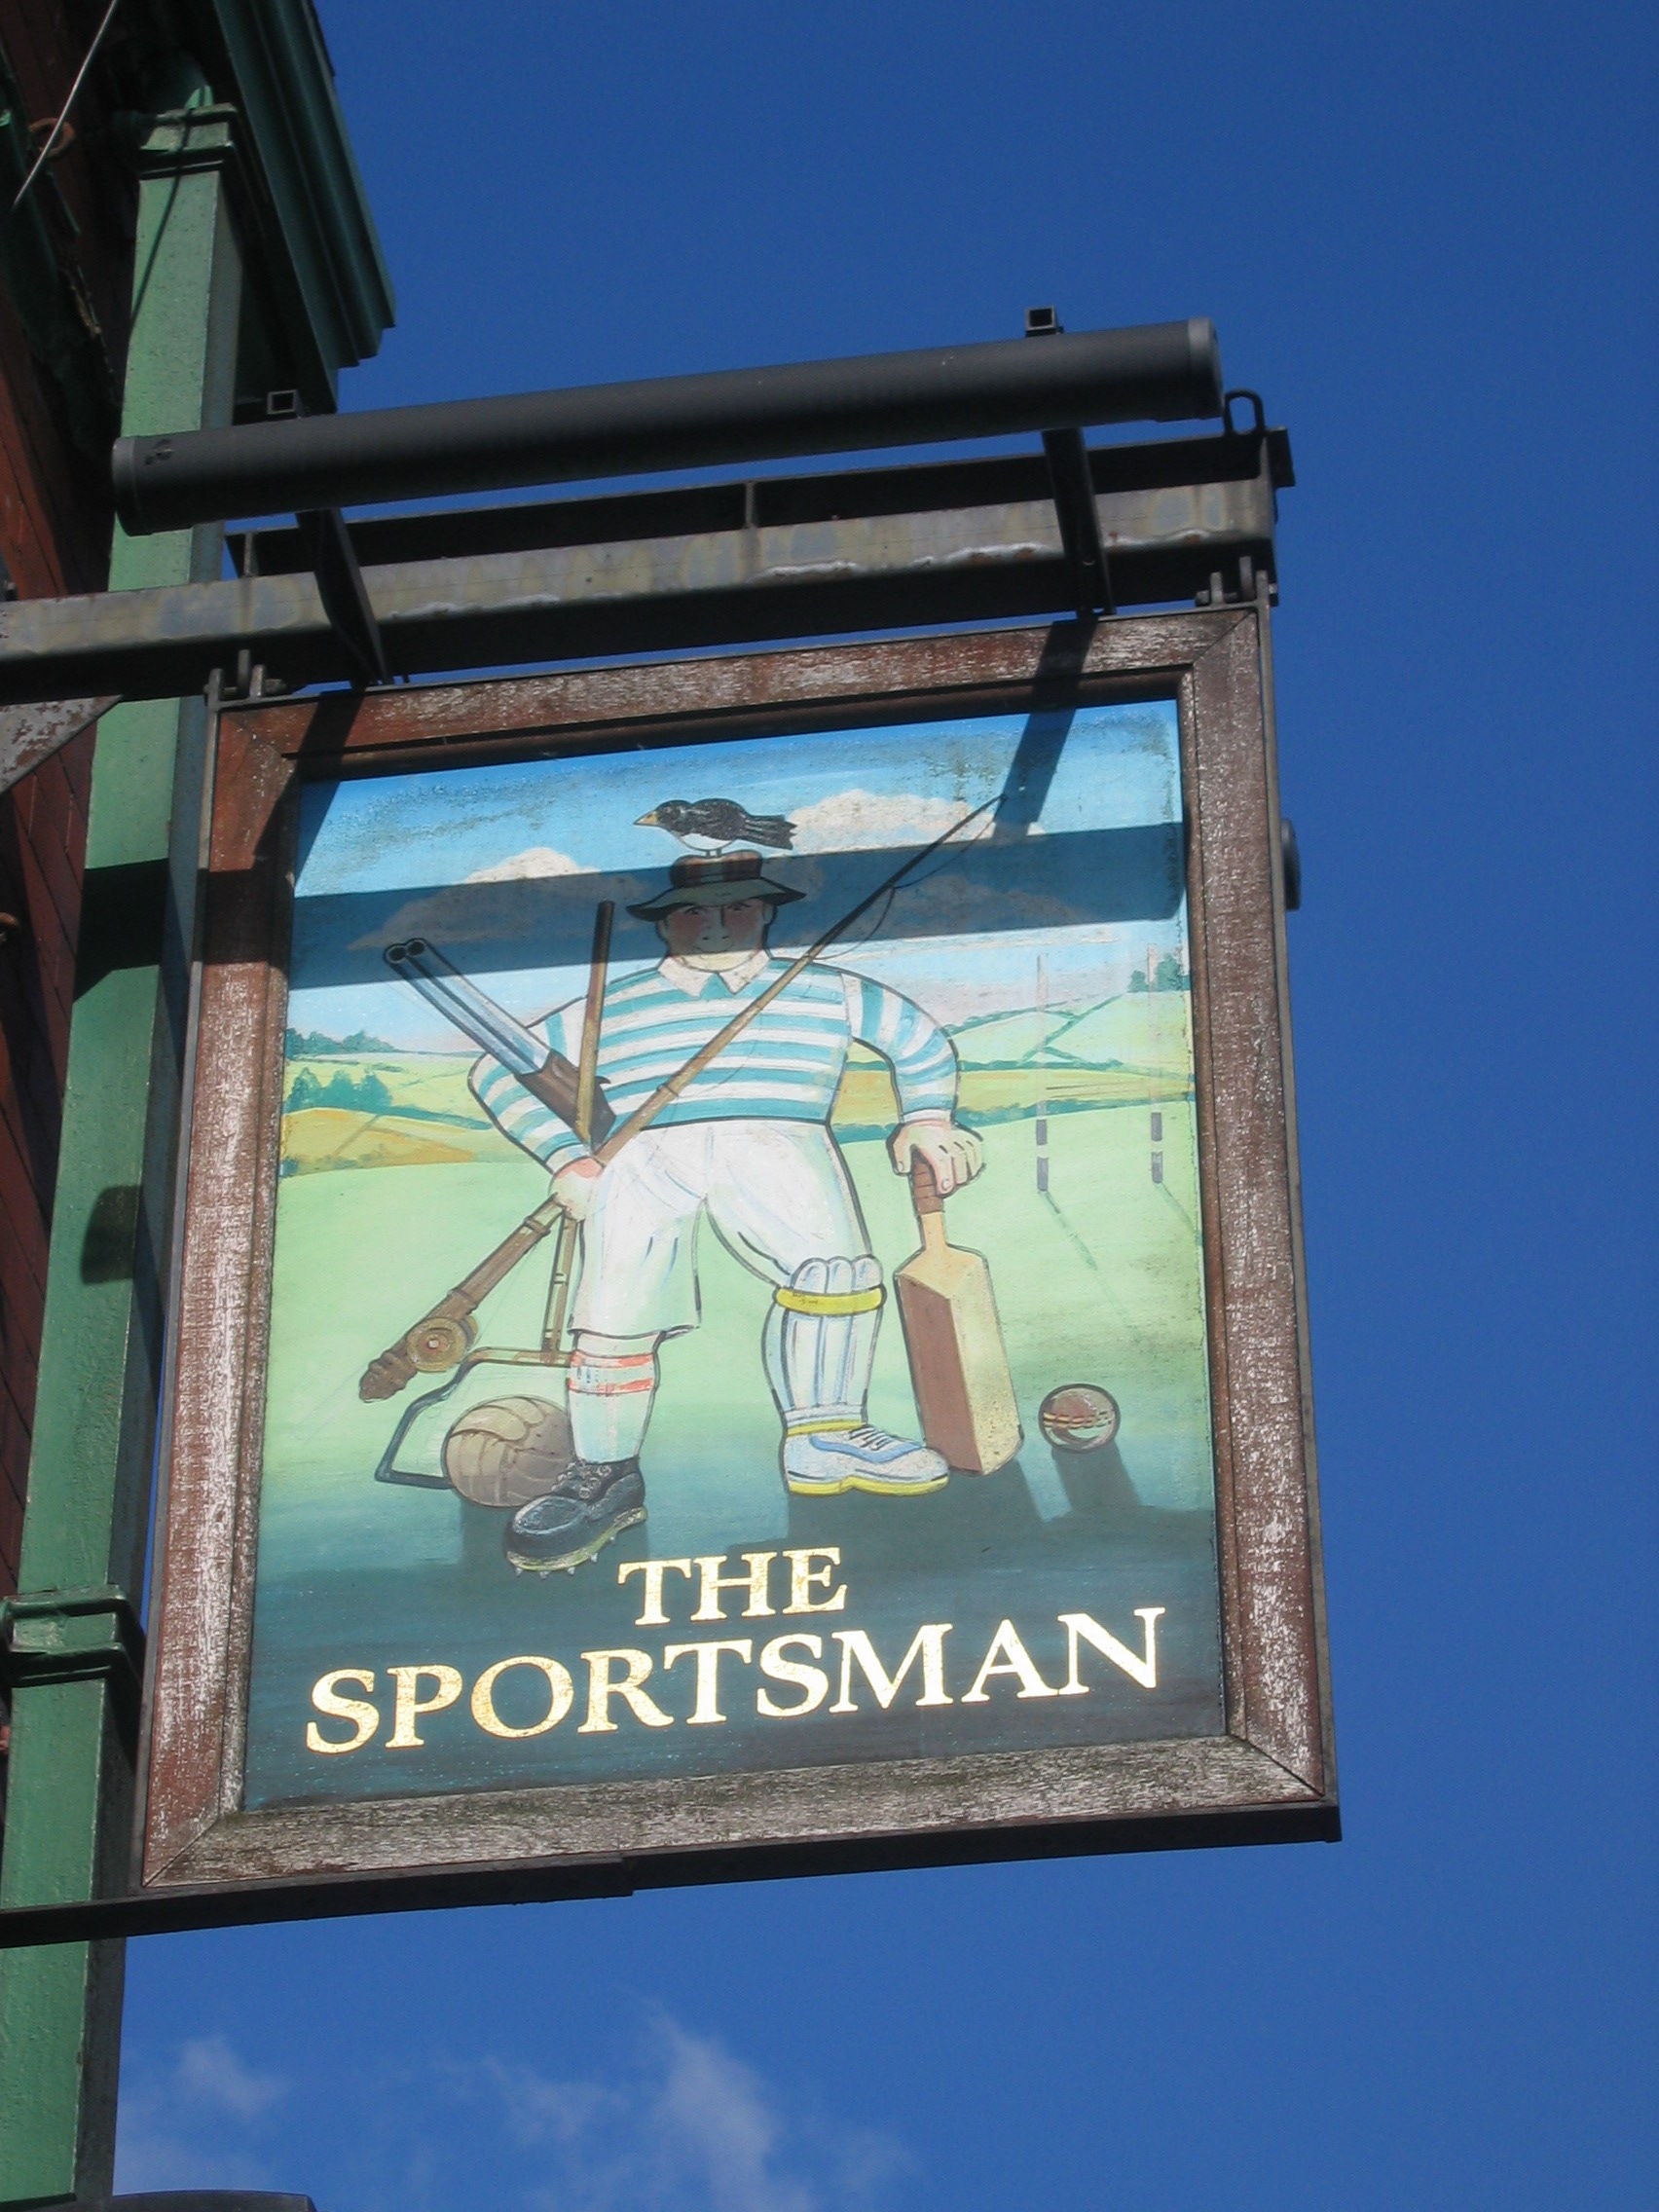 Photo taken by me – The Sportsman pub sign, Hyde, Manchester